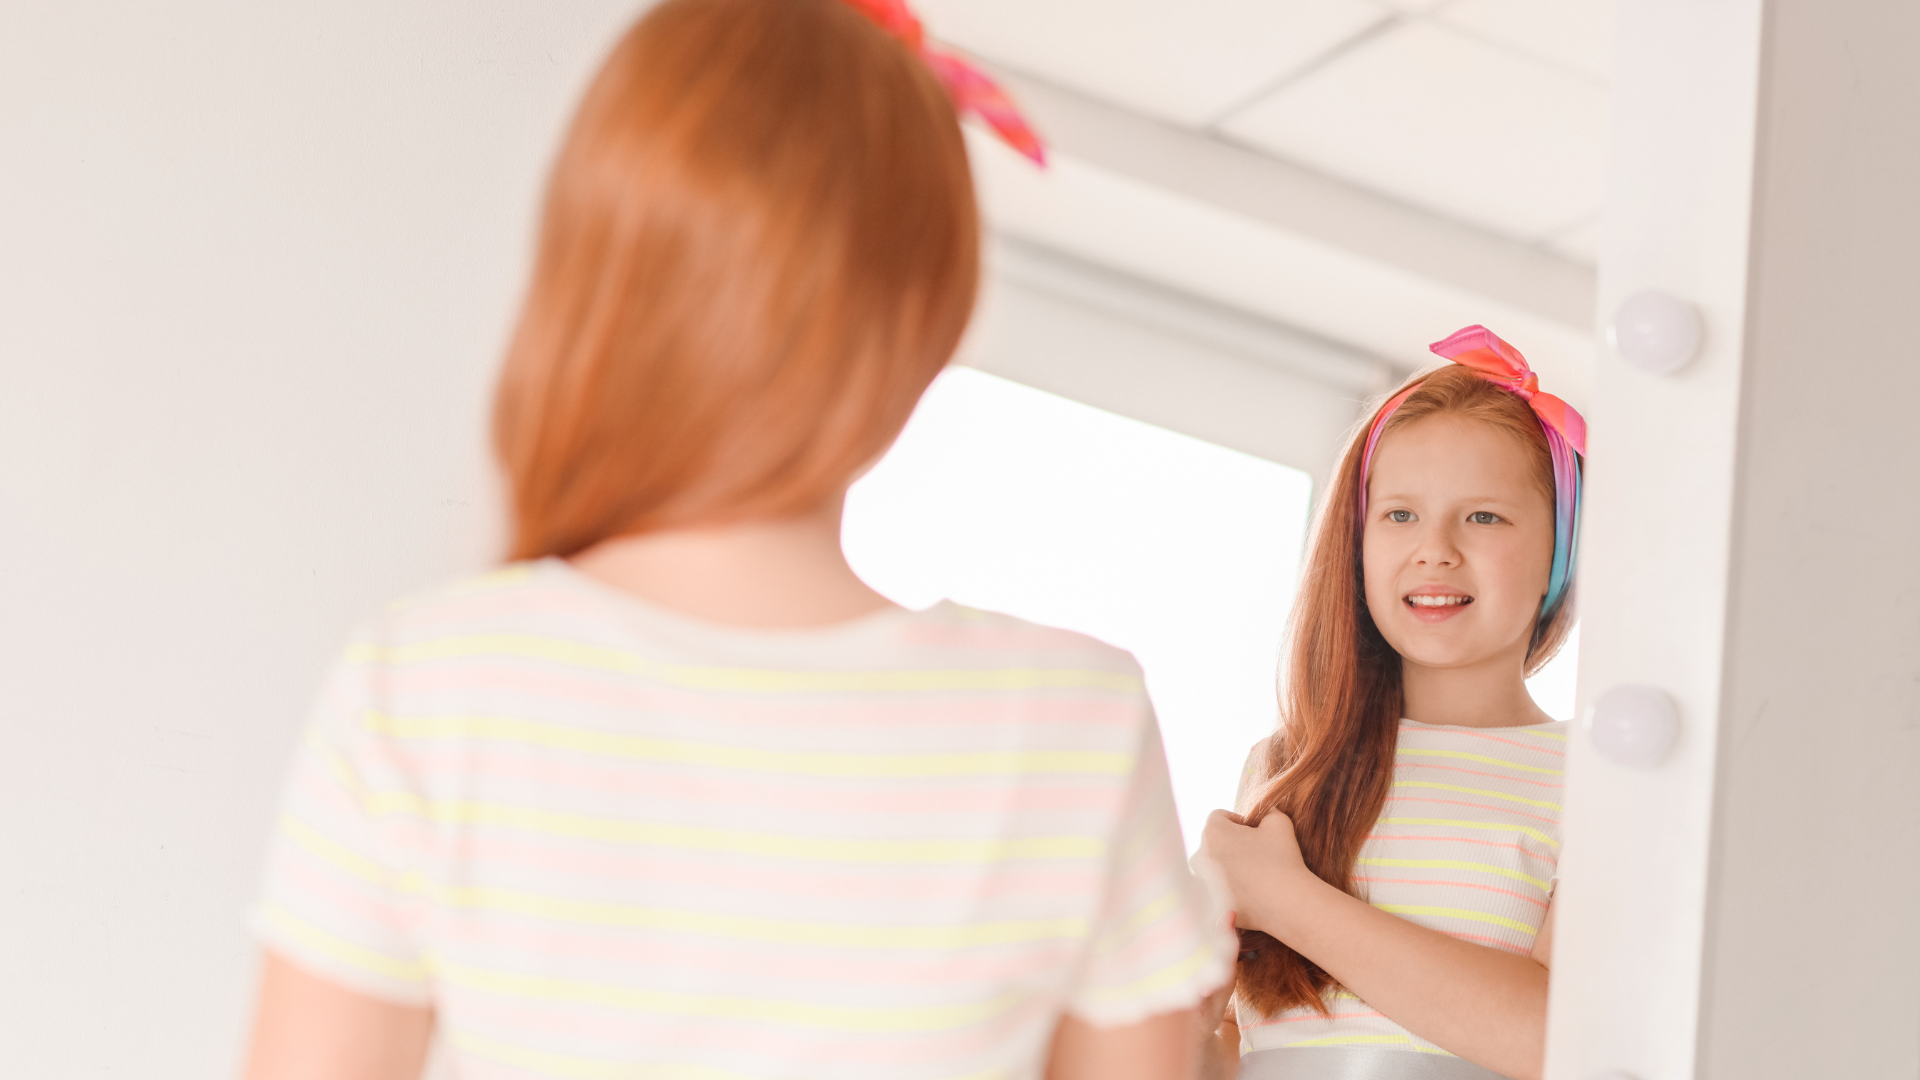 The Link Between Physical Appearance and Self-Perception in Children